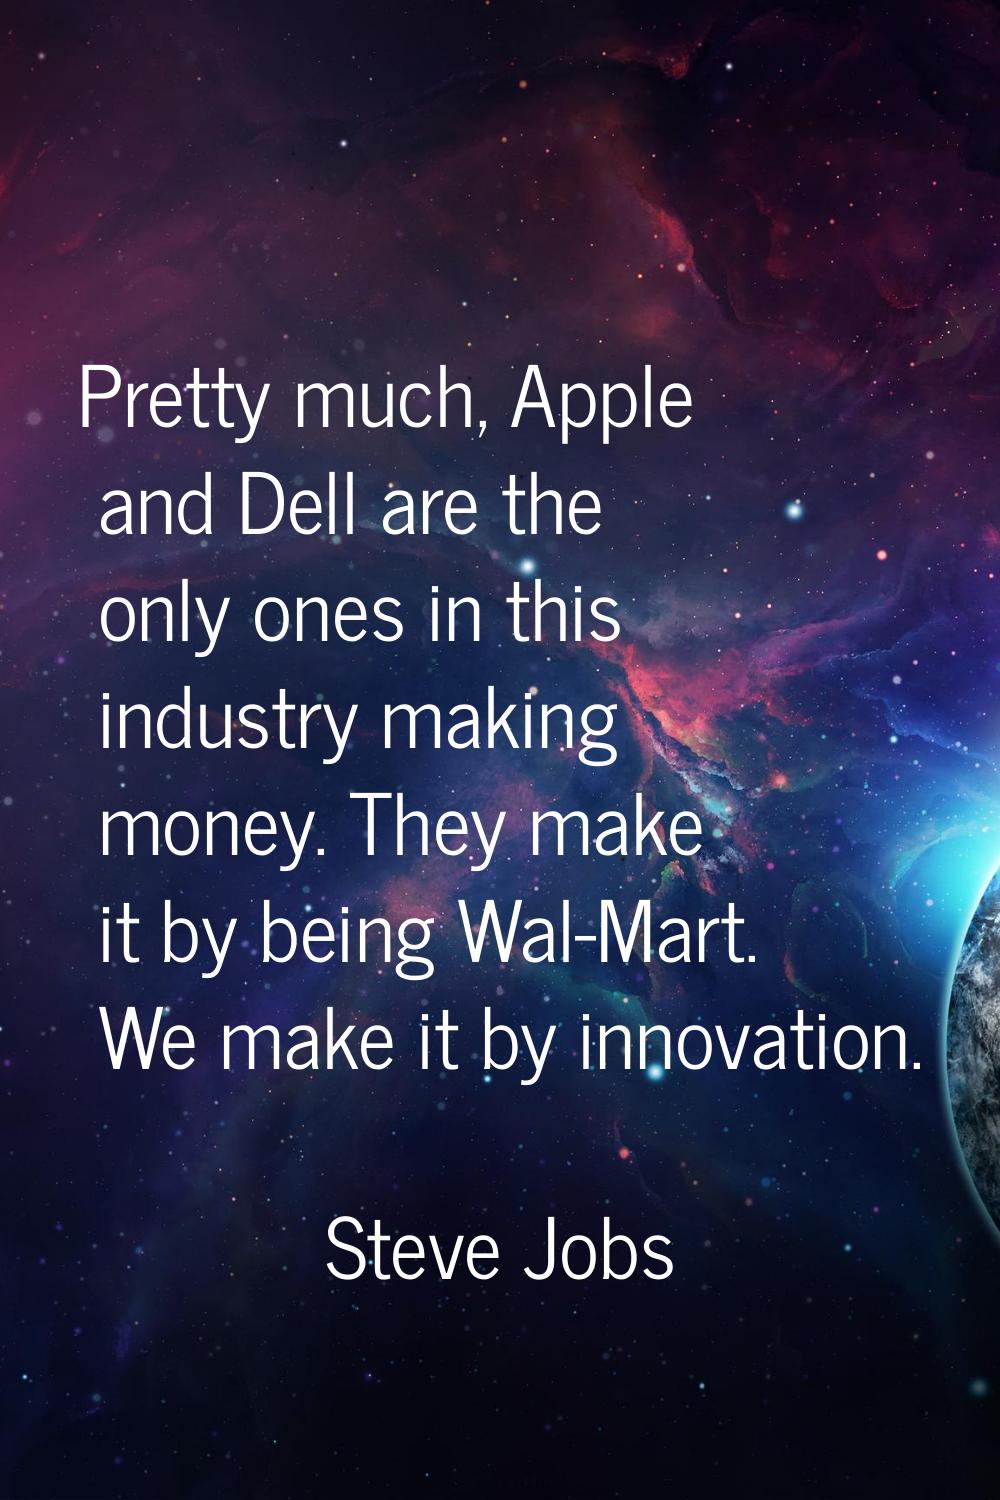 Pretty much, Apple and Dell are the only ones in this industry making money. They make it by being 